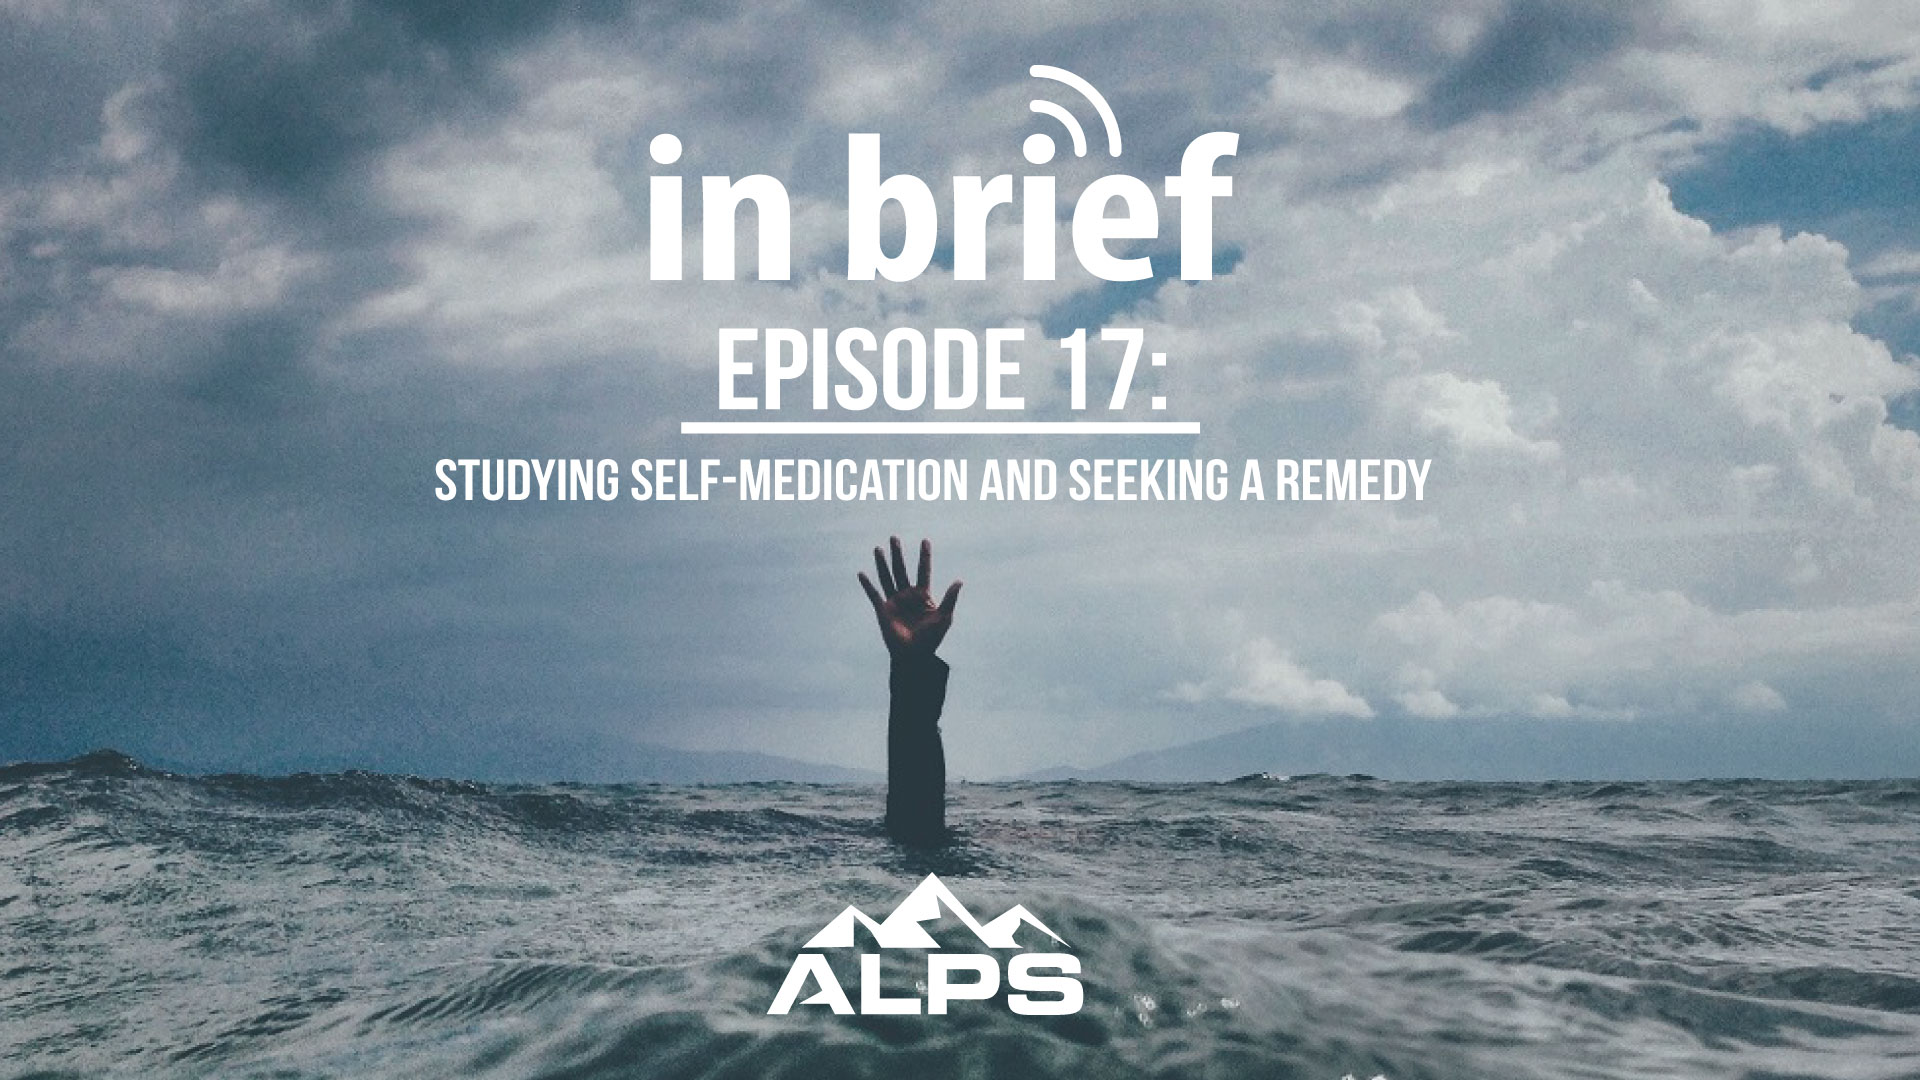 ALPS In Brief Podcast - Episode 17: Studying Self-Medication and Seeking a Remedy